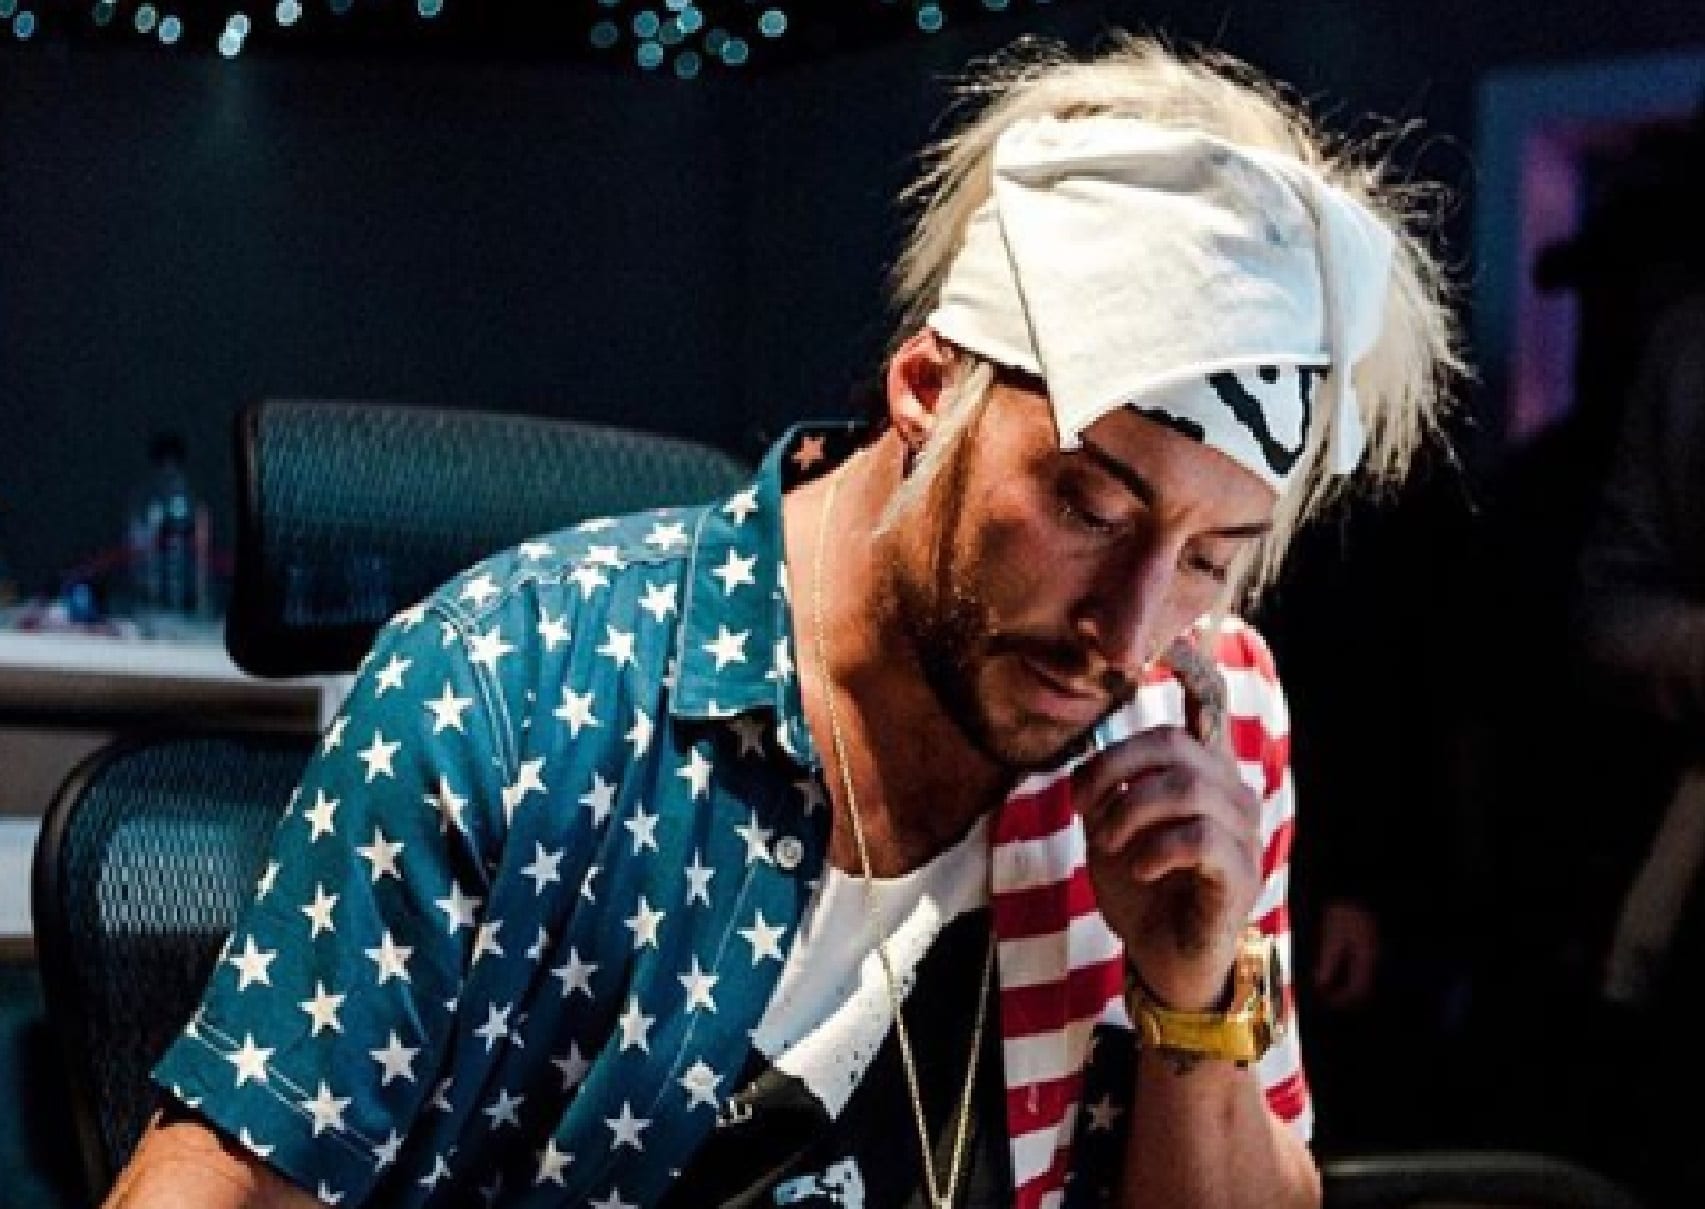 Enzo Amore Shows Off New Tattoo Of Biggie Smalls As Lady Liberty